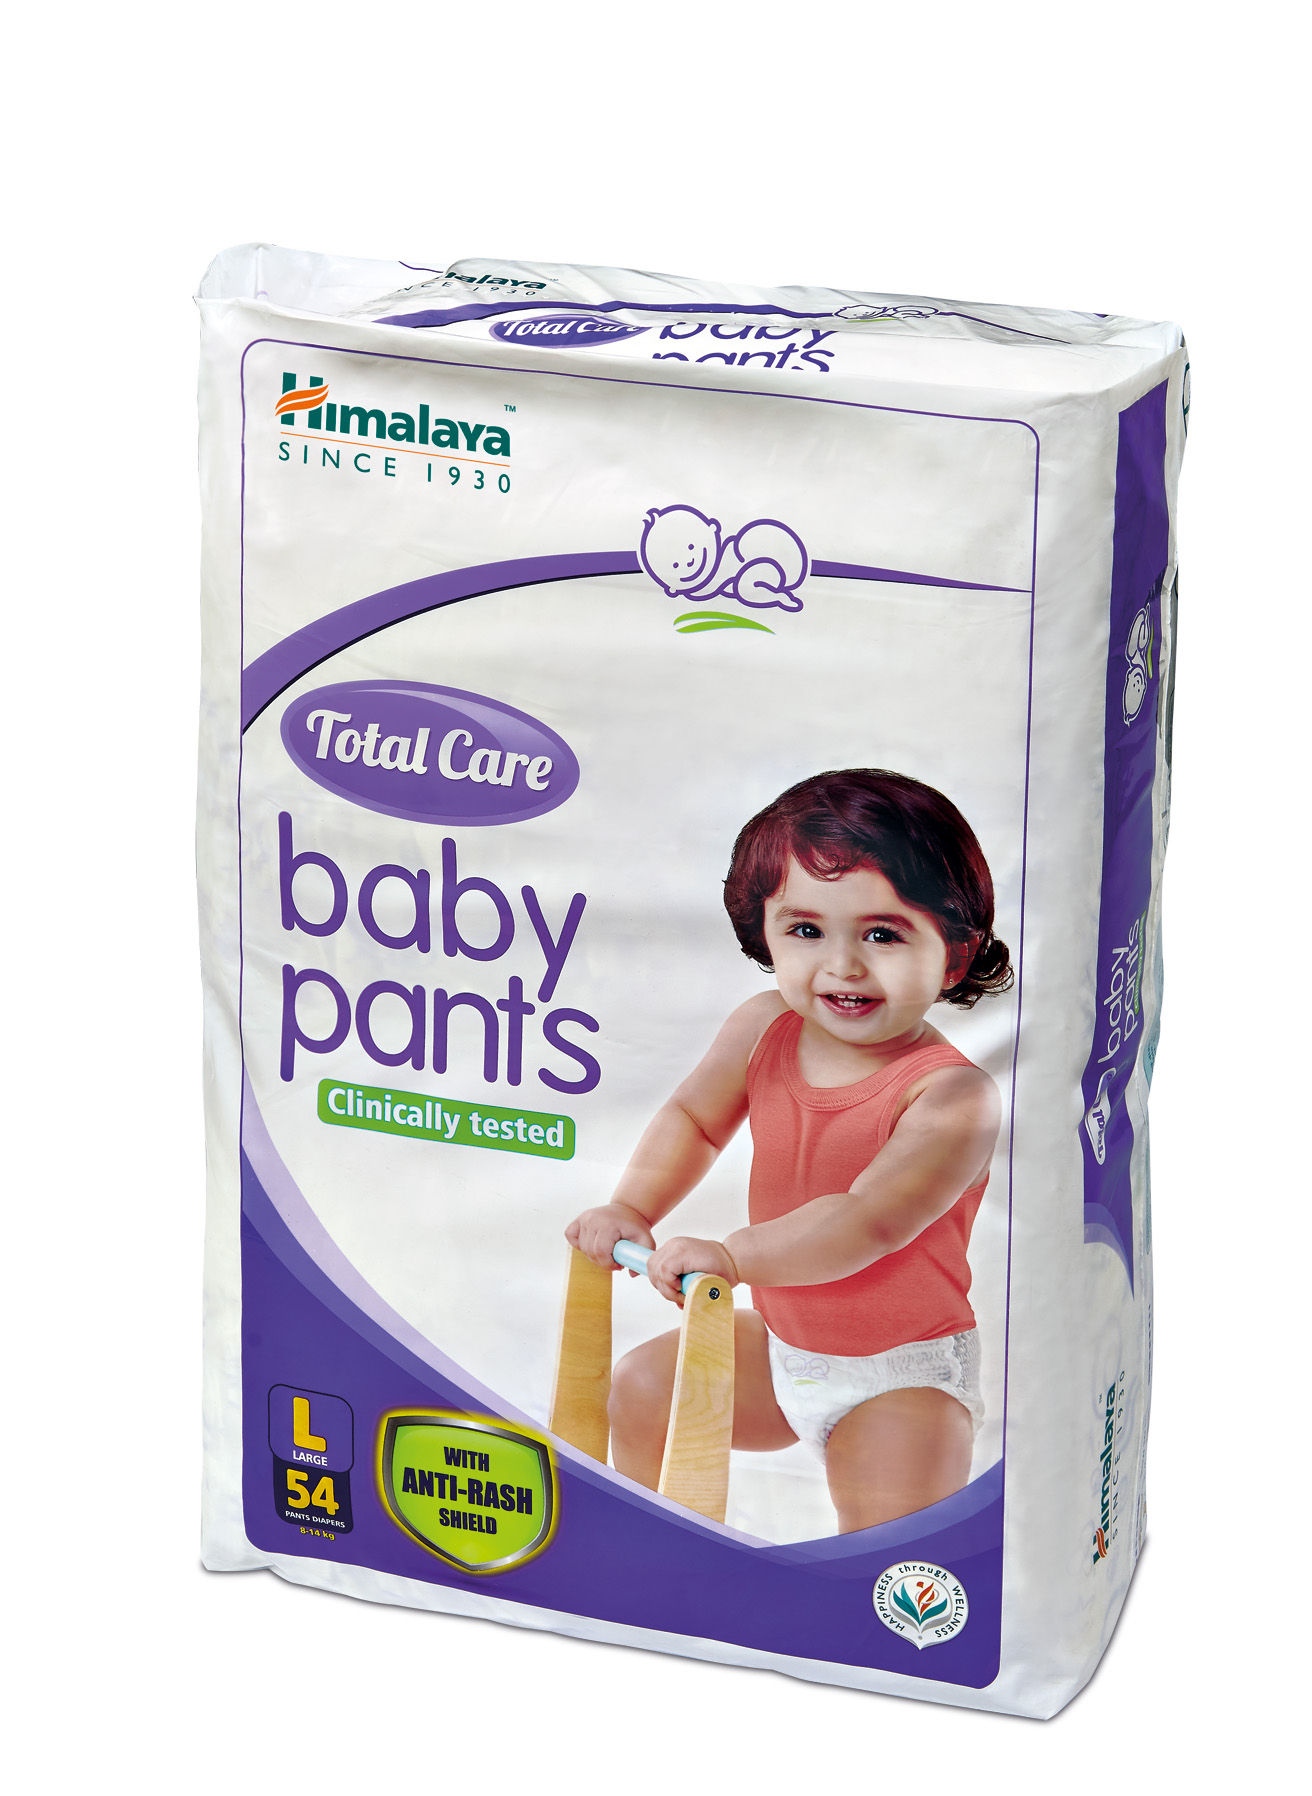 HIMALAYA TOTAL CARE BABY PANTS DIAPERSM54SPO2  M Price in India Full  Specifications  Offers  DTashioncom